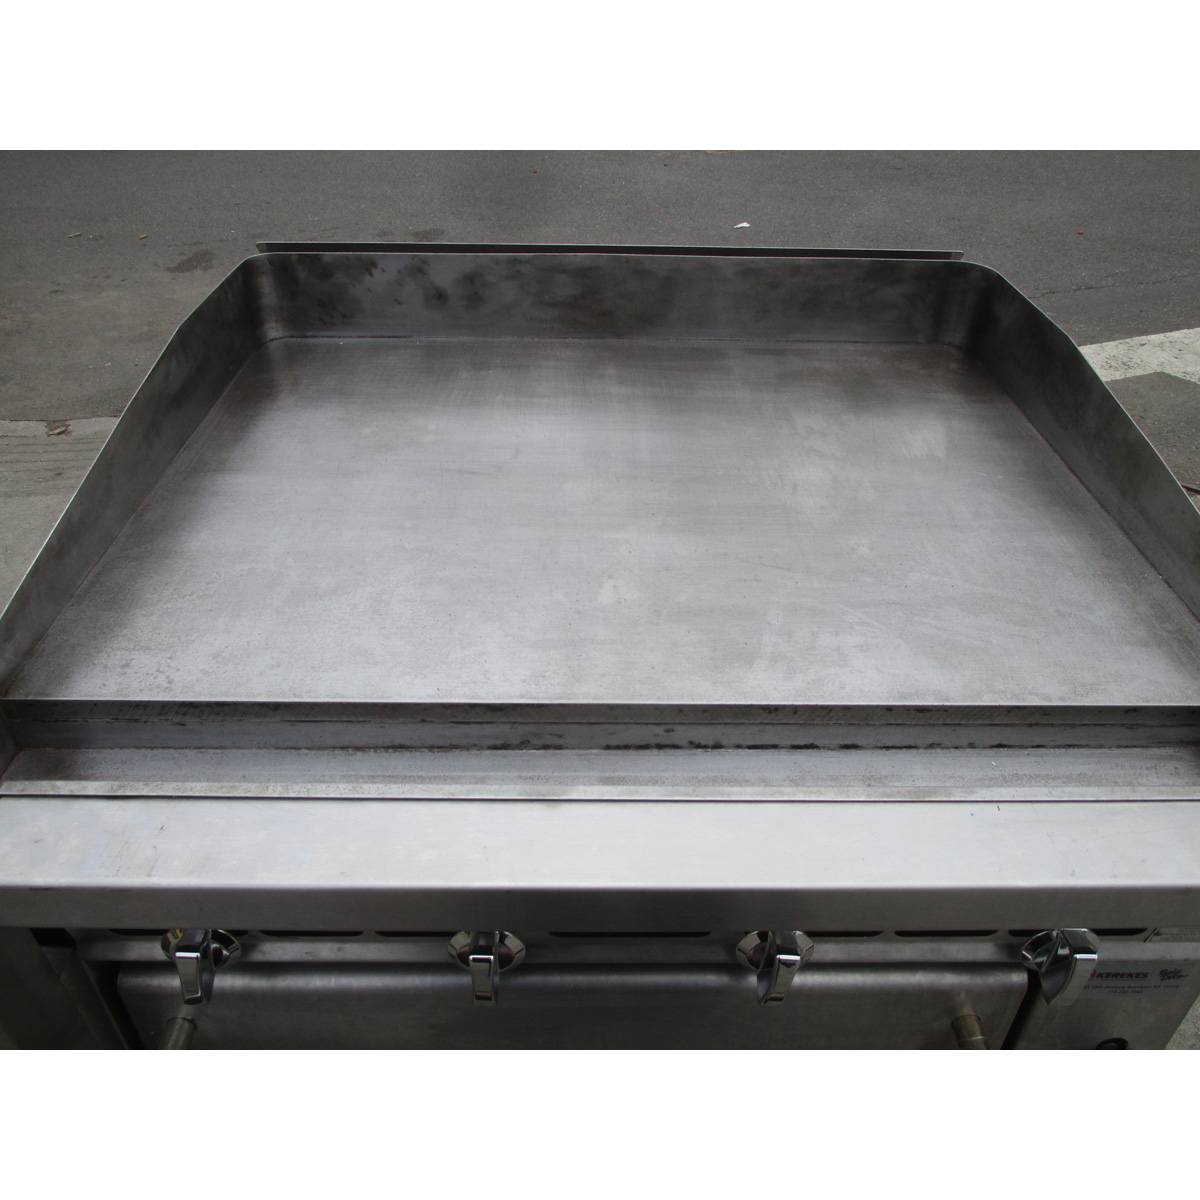 Montague 136-8 Legend 36" Griddle With Oven, Used Very Good Condition image 1